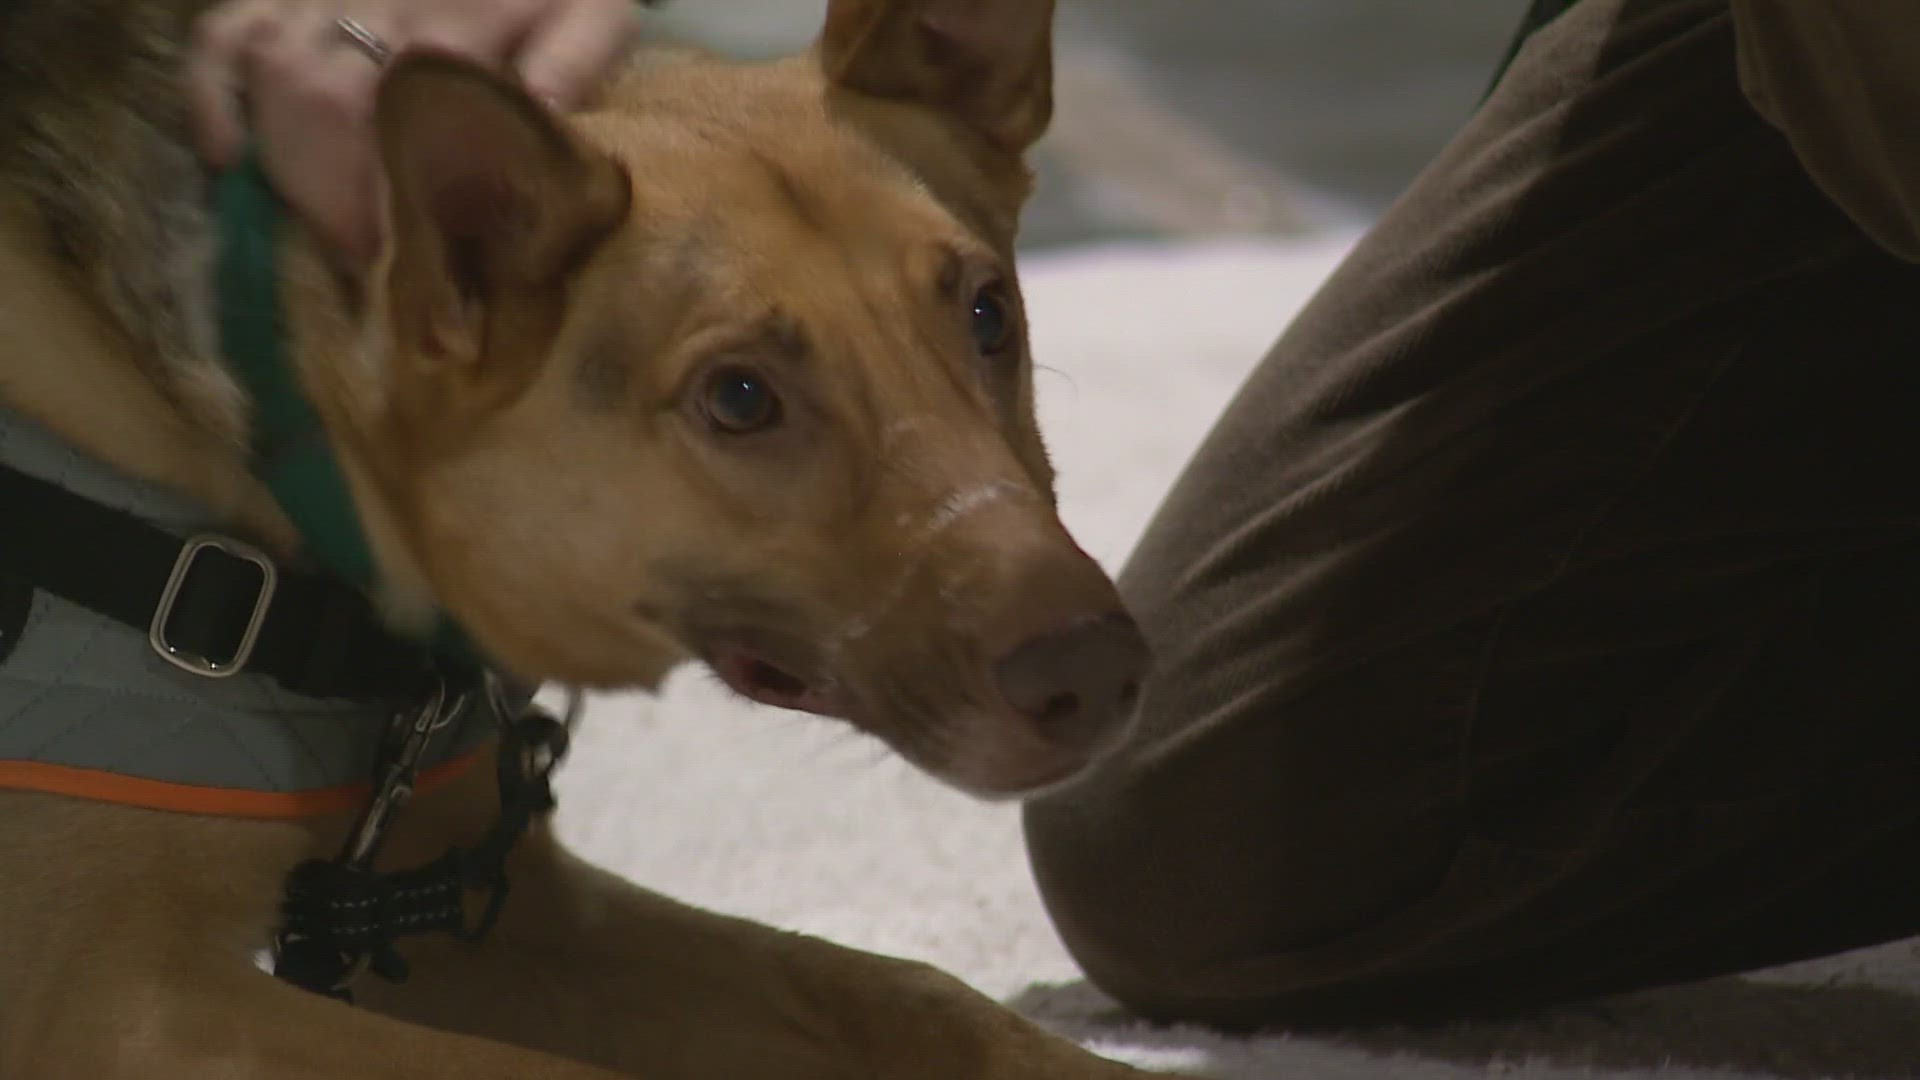 The proposed legislation would enhance first-degree animal cruelty to a ranked felony.